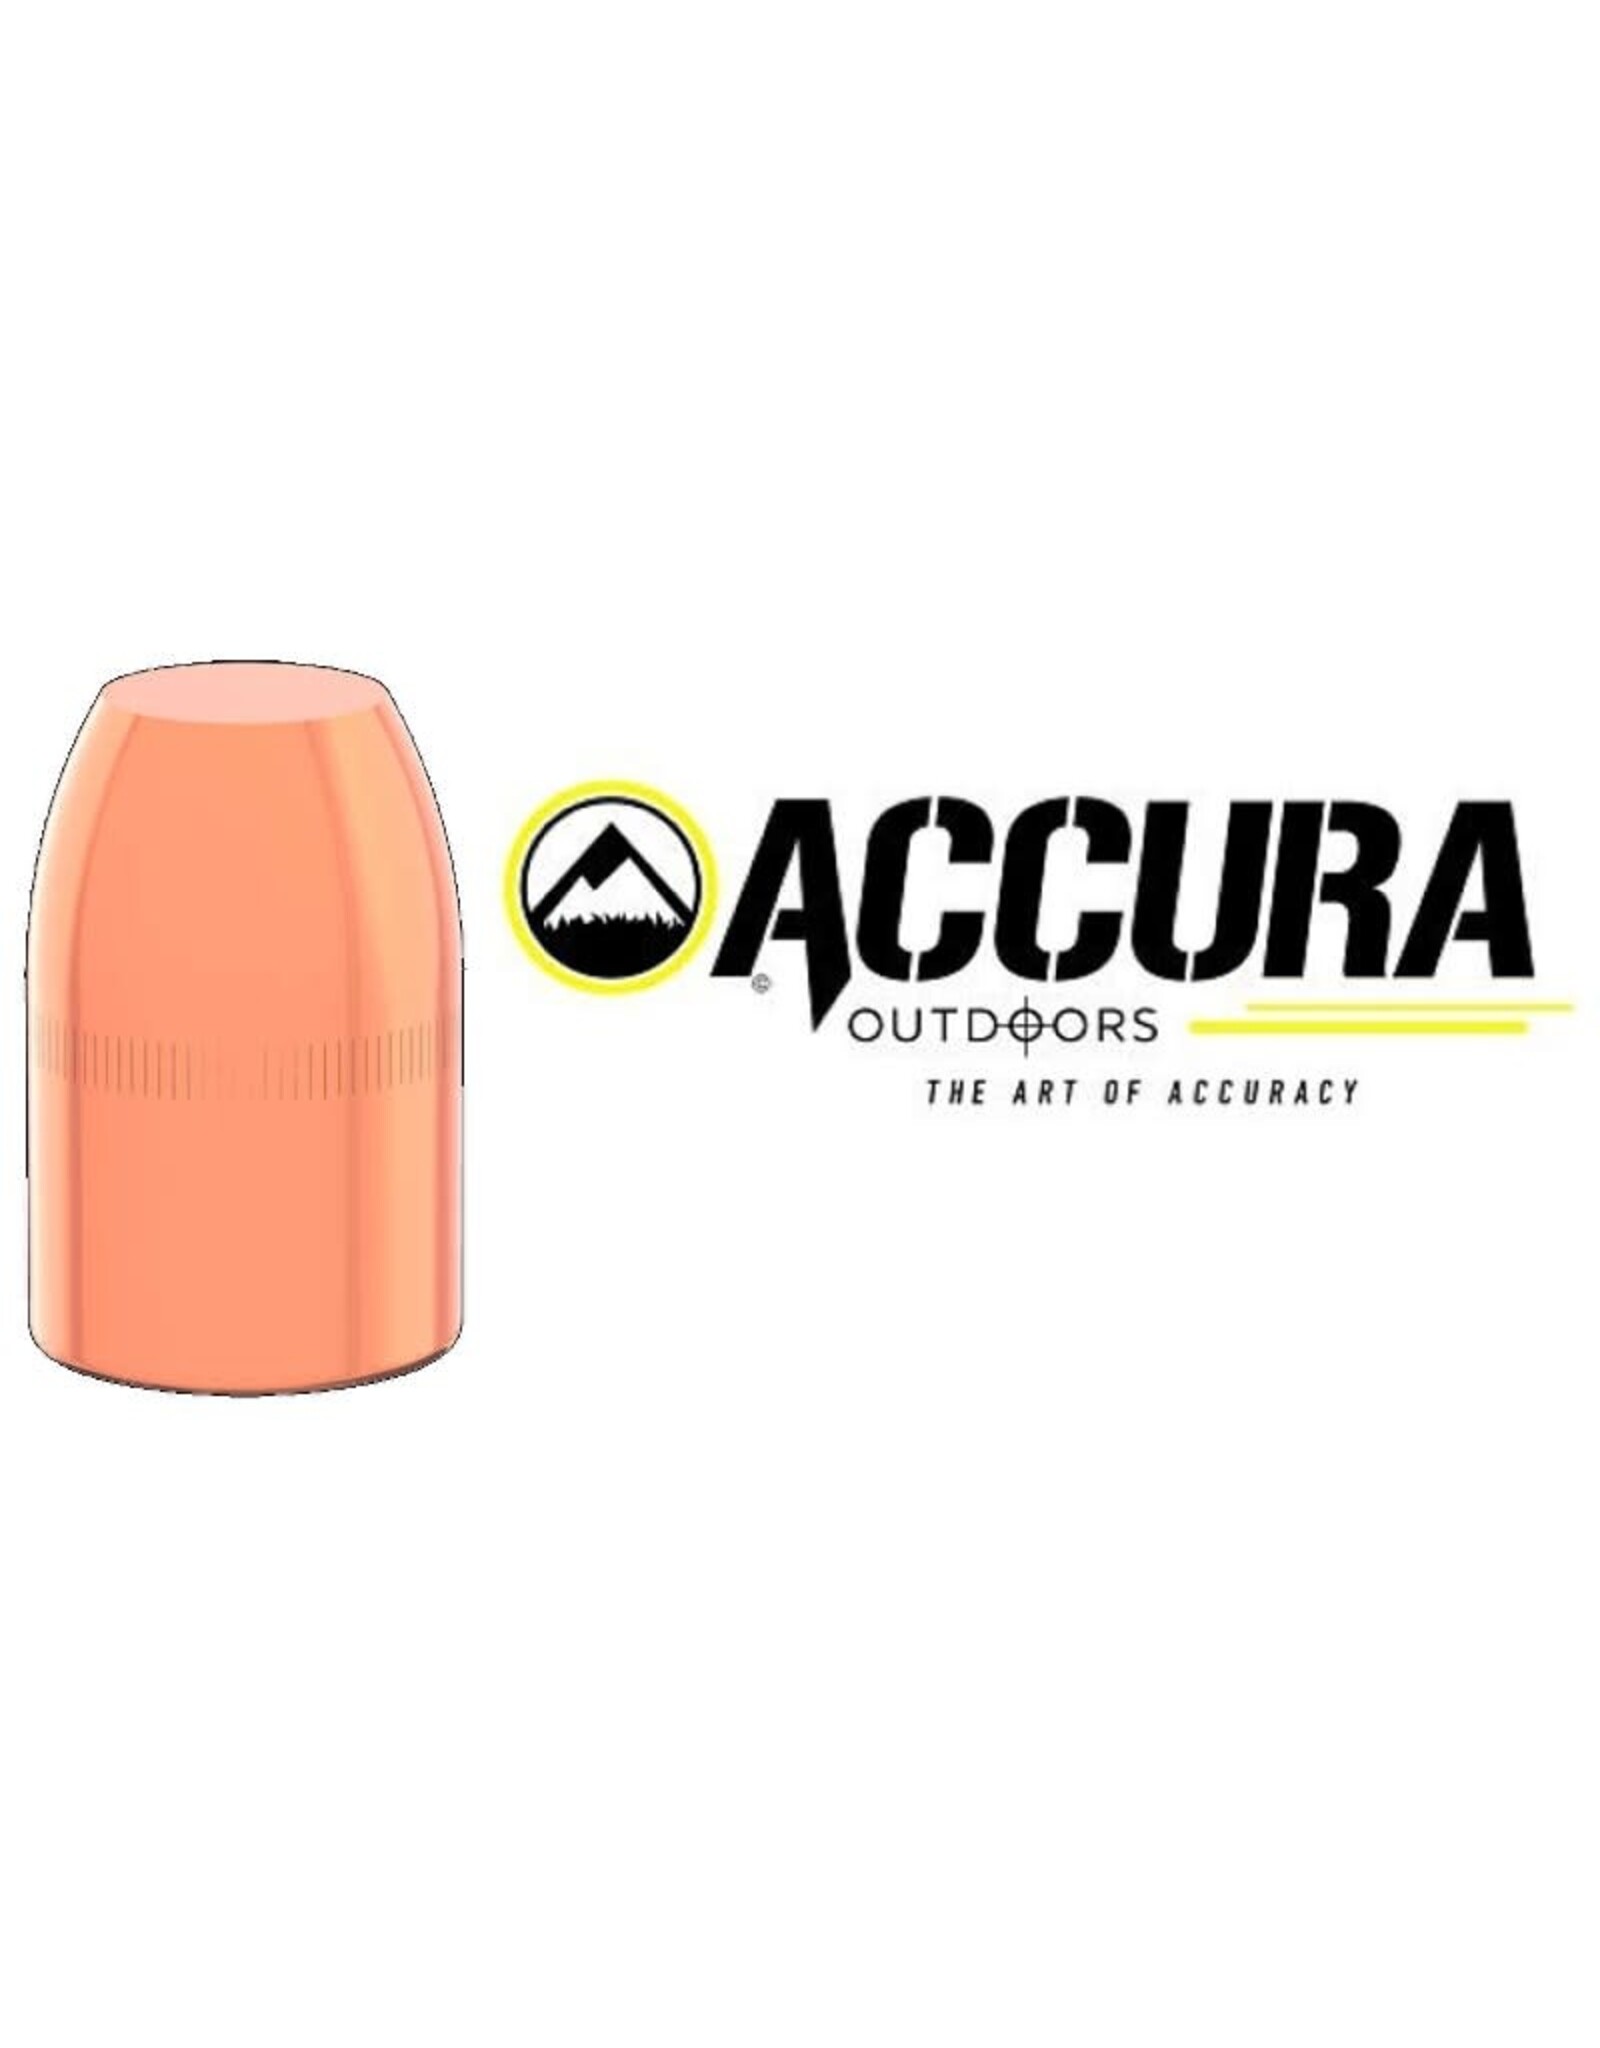 Accura Accura Bullets .44 Cal 240 GR Flat Point (.430") - 500 Count